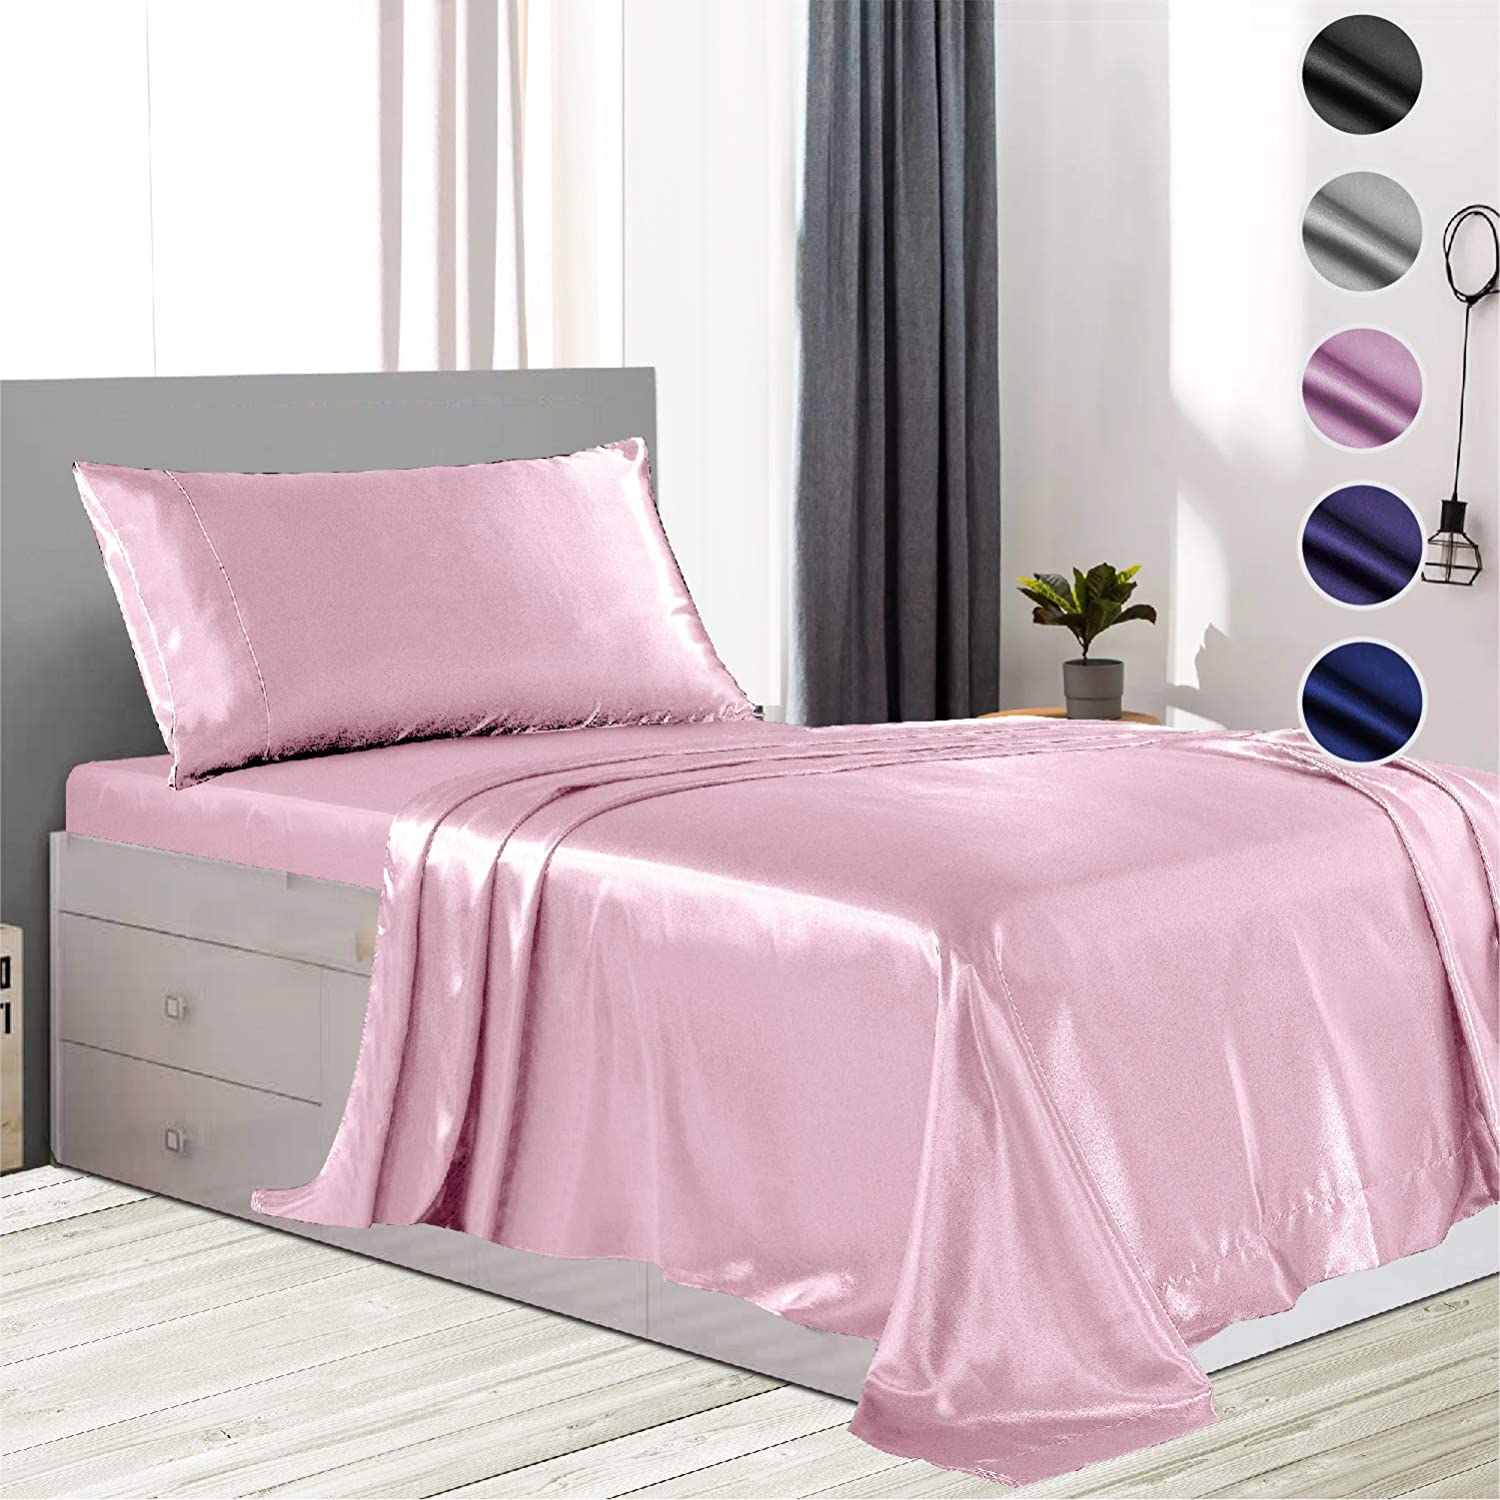 Details about   RUDONMG 4 Piece Rust Satin Sheets Full Size Satin Bed Sheets Set Silky Satin She 